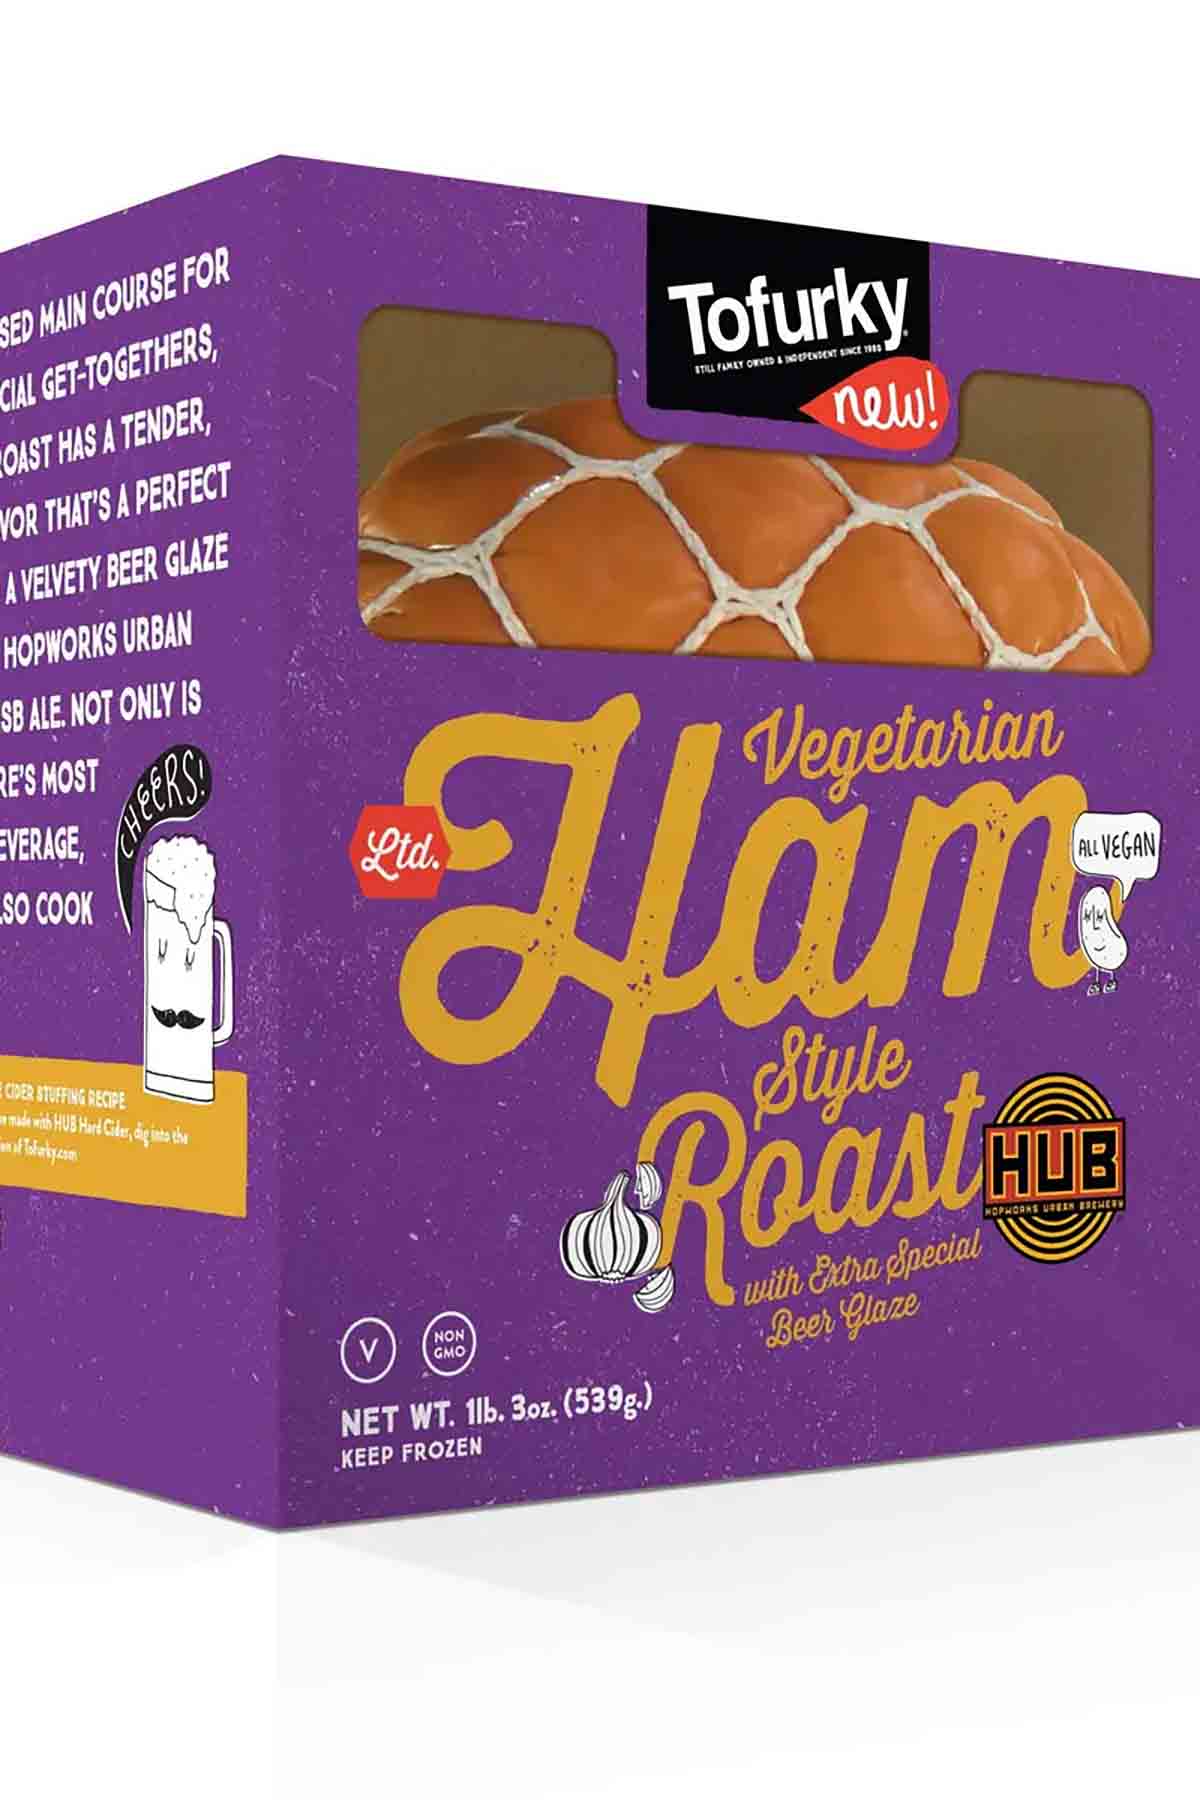 purple box containing a Tofurky Ham, with a cutout so you can see the vegetarian ham at the top